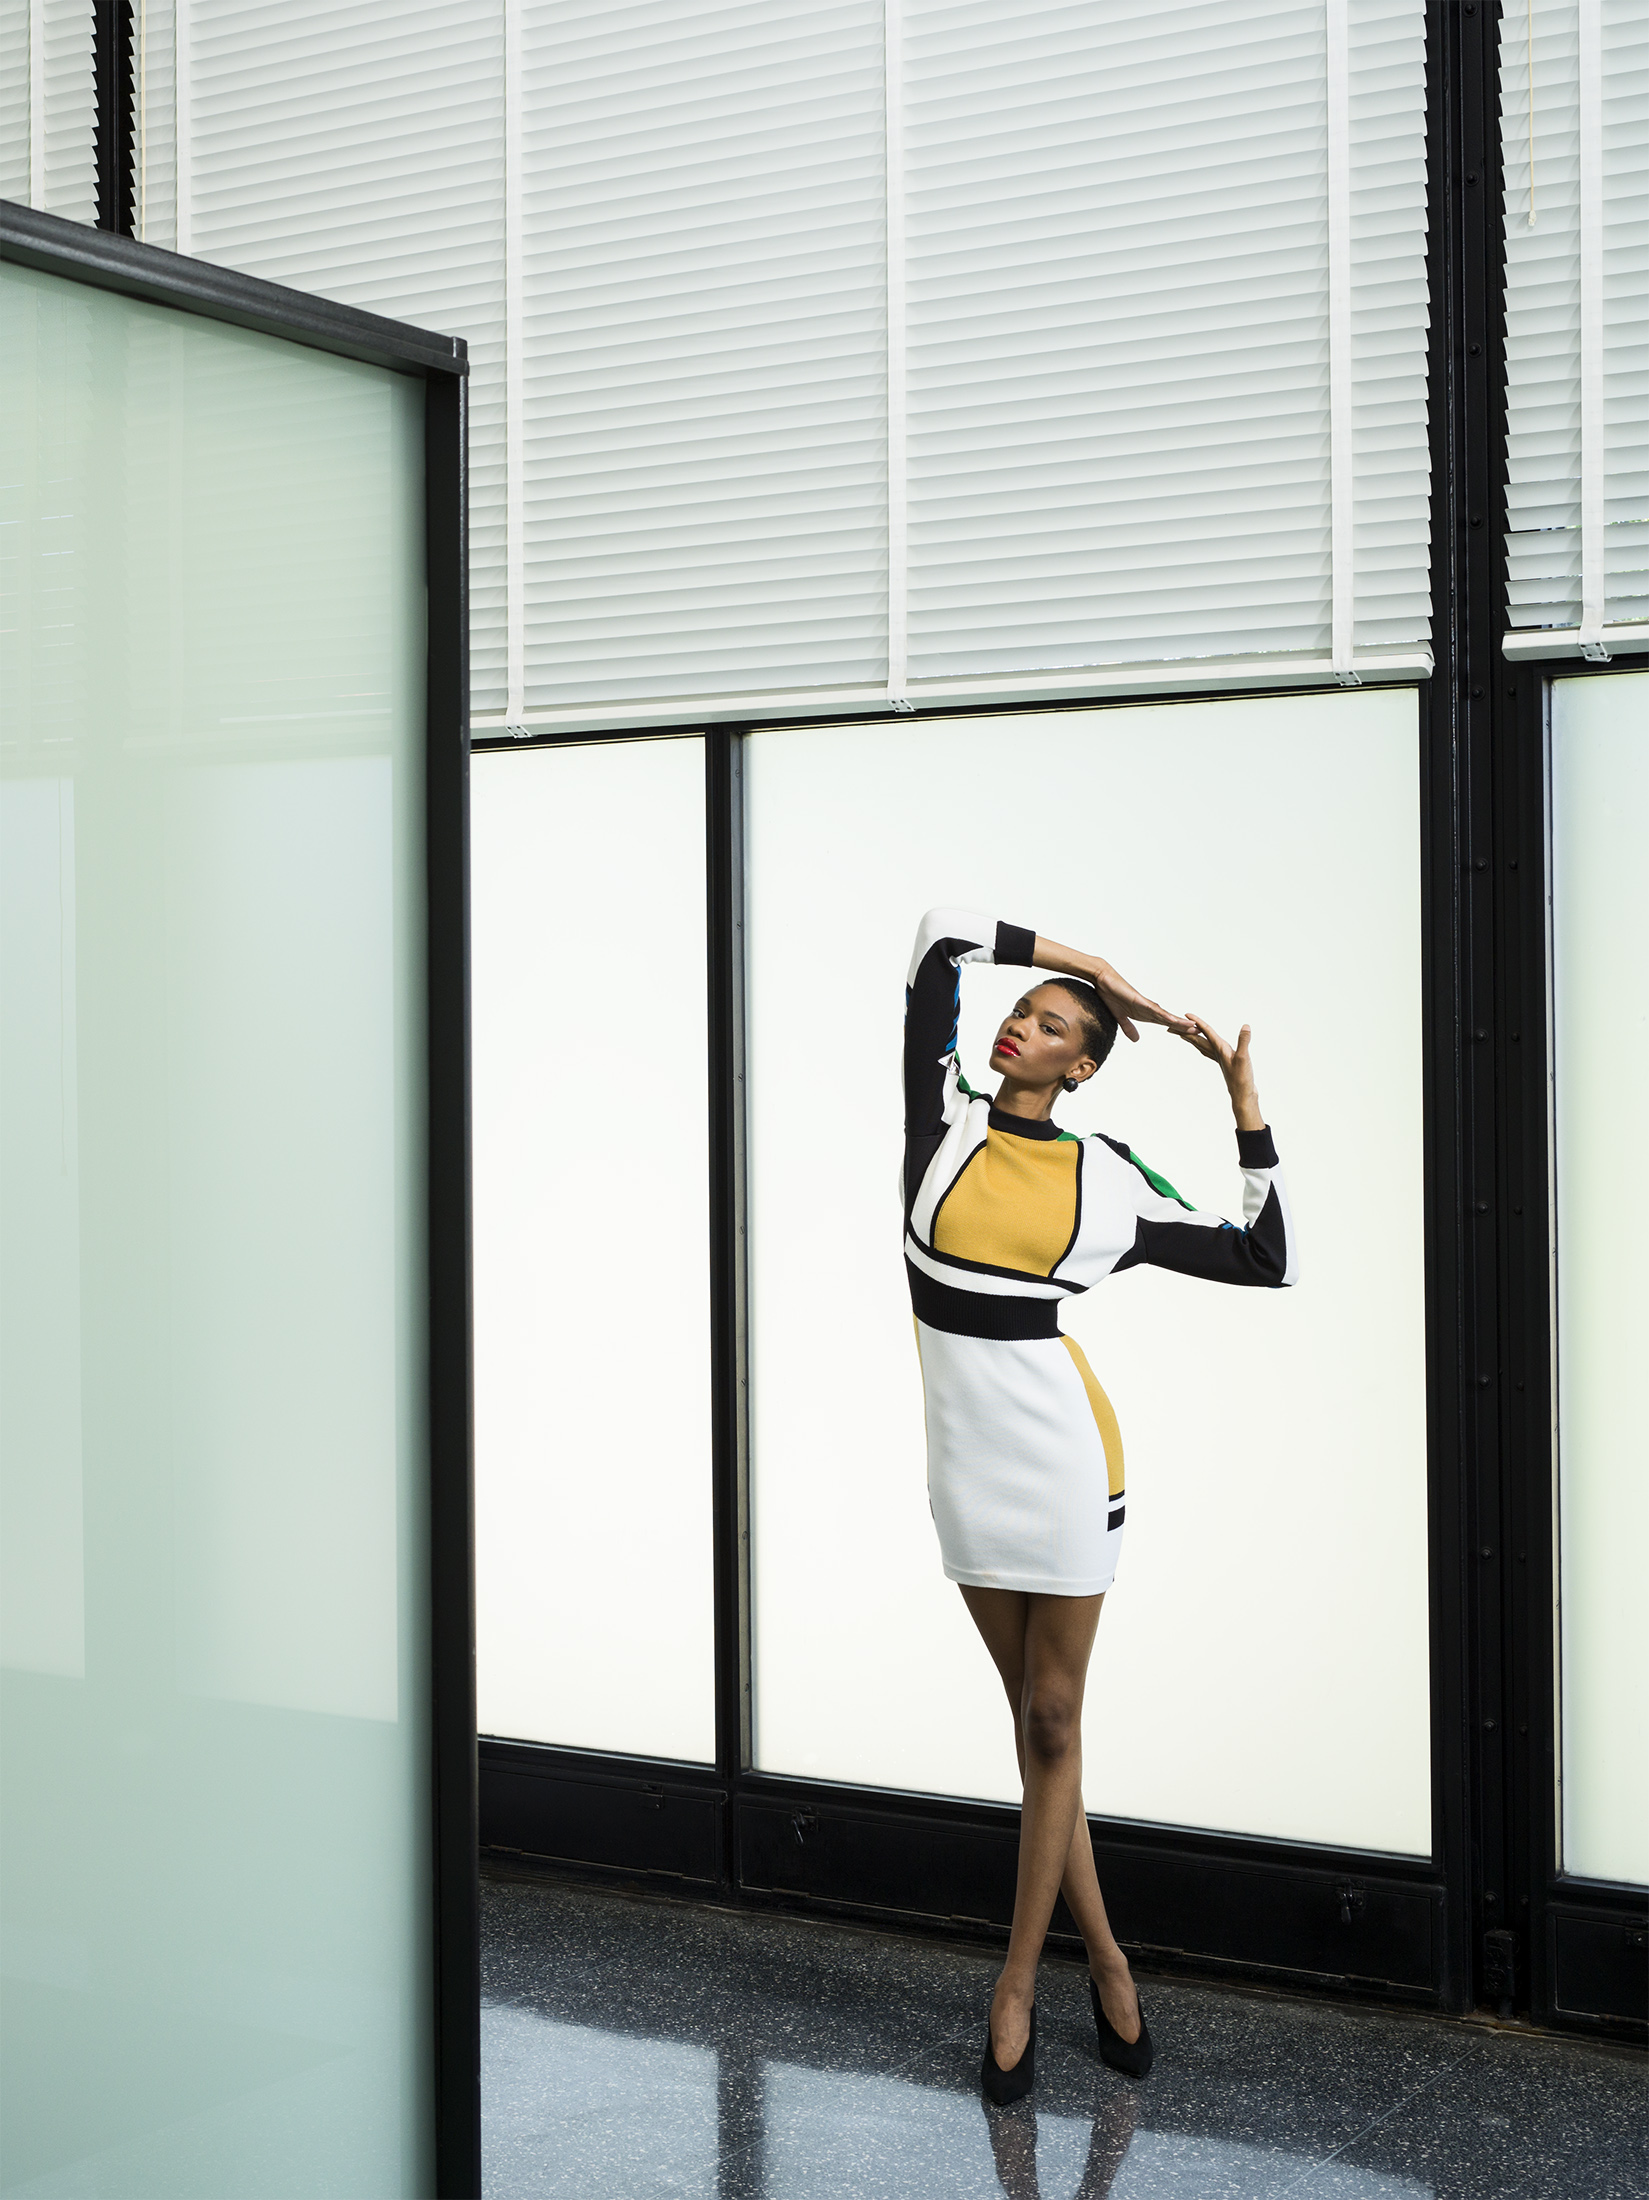 Modern Icon, Fall Fashion Story inspired by Mies van der Rohe and the Bauhaus. For Chicago Magazine